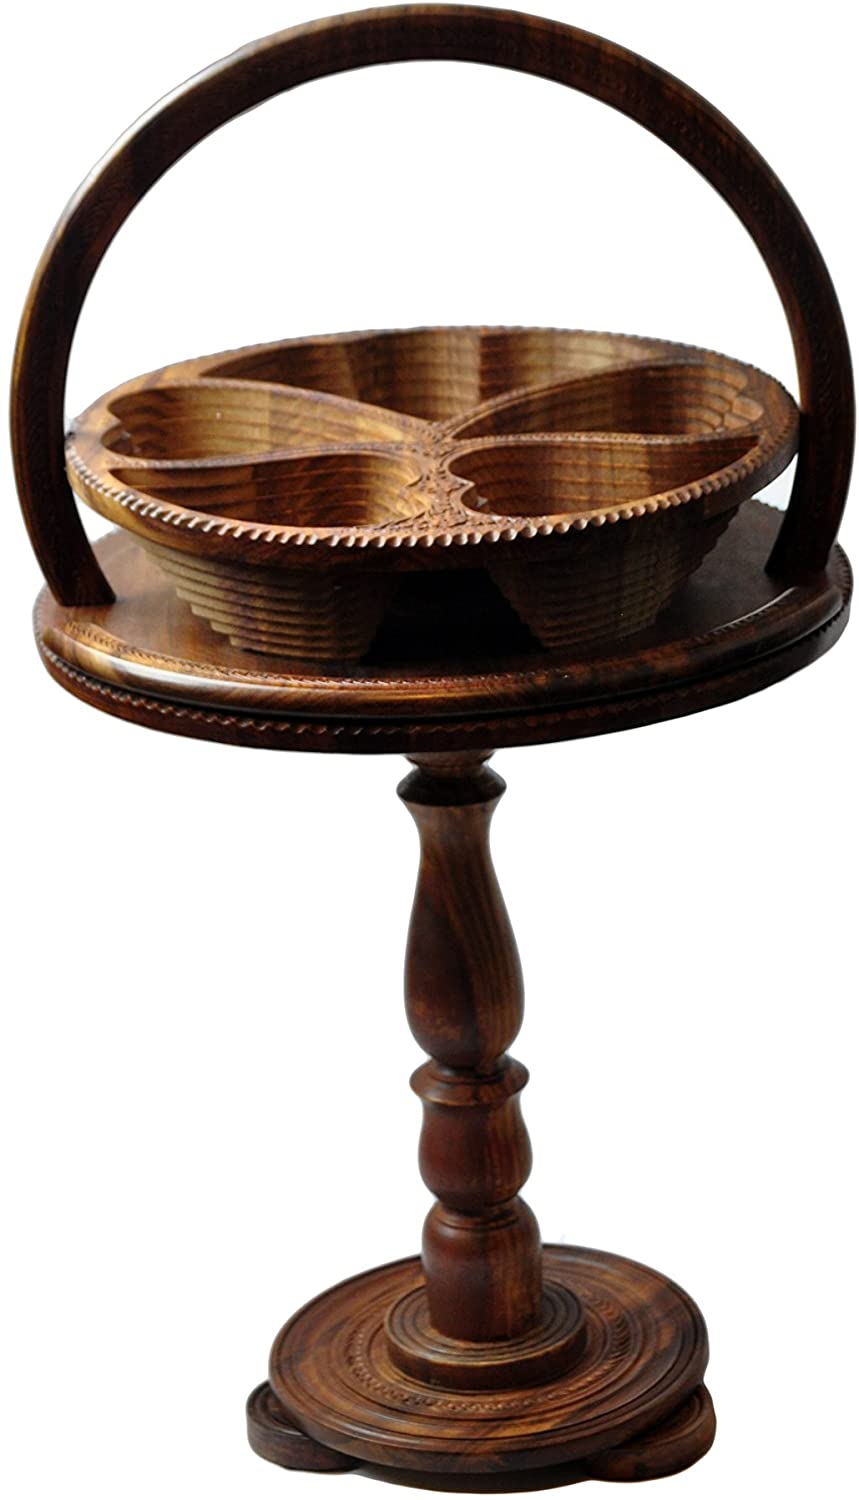 Wooden Collapsible Basket with Stand -2 in 1- Royal Small Table -Antique Table (Collapsible Basket) - Intense oud